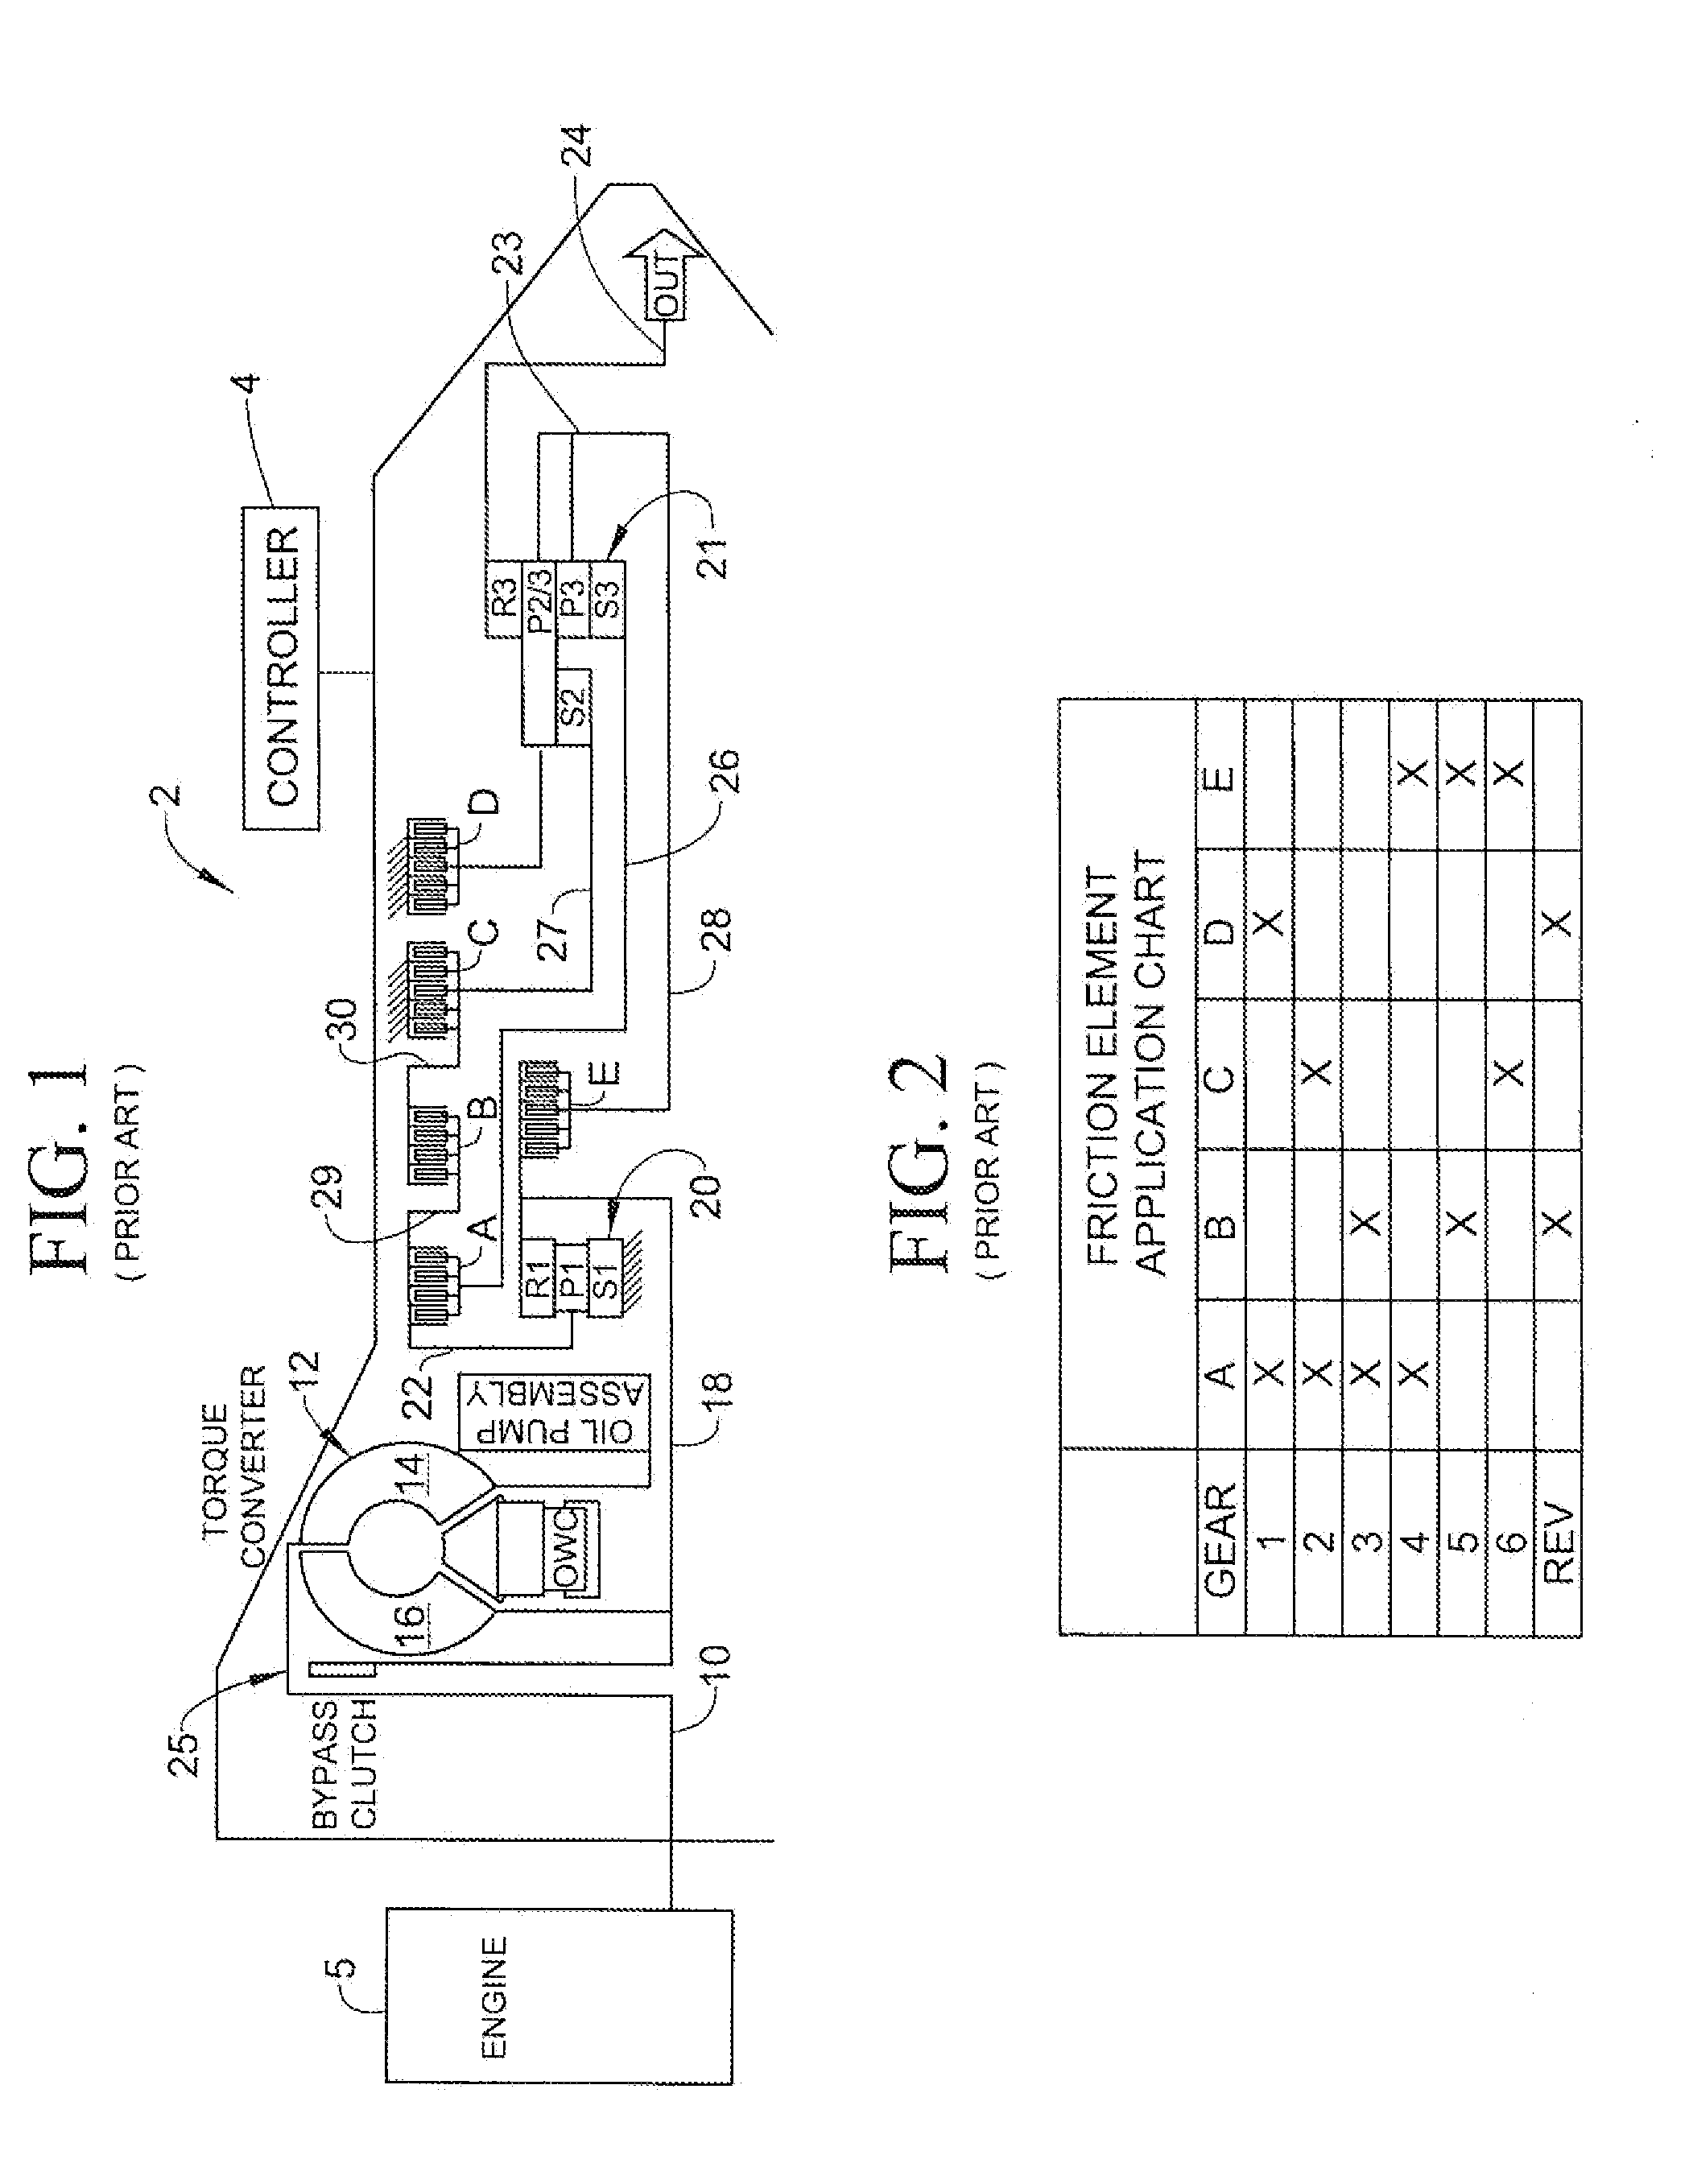 Closed-Loop Torque Phase Control for Shifting Automatic Transmission Gear Ratios Based on Friction Element Load Sensing